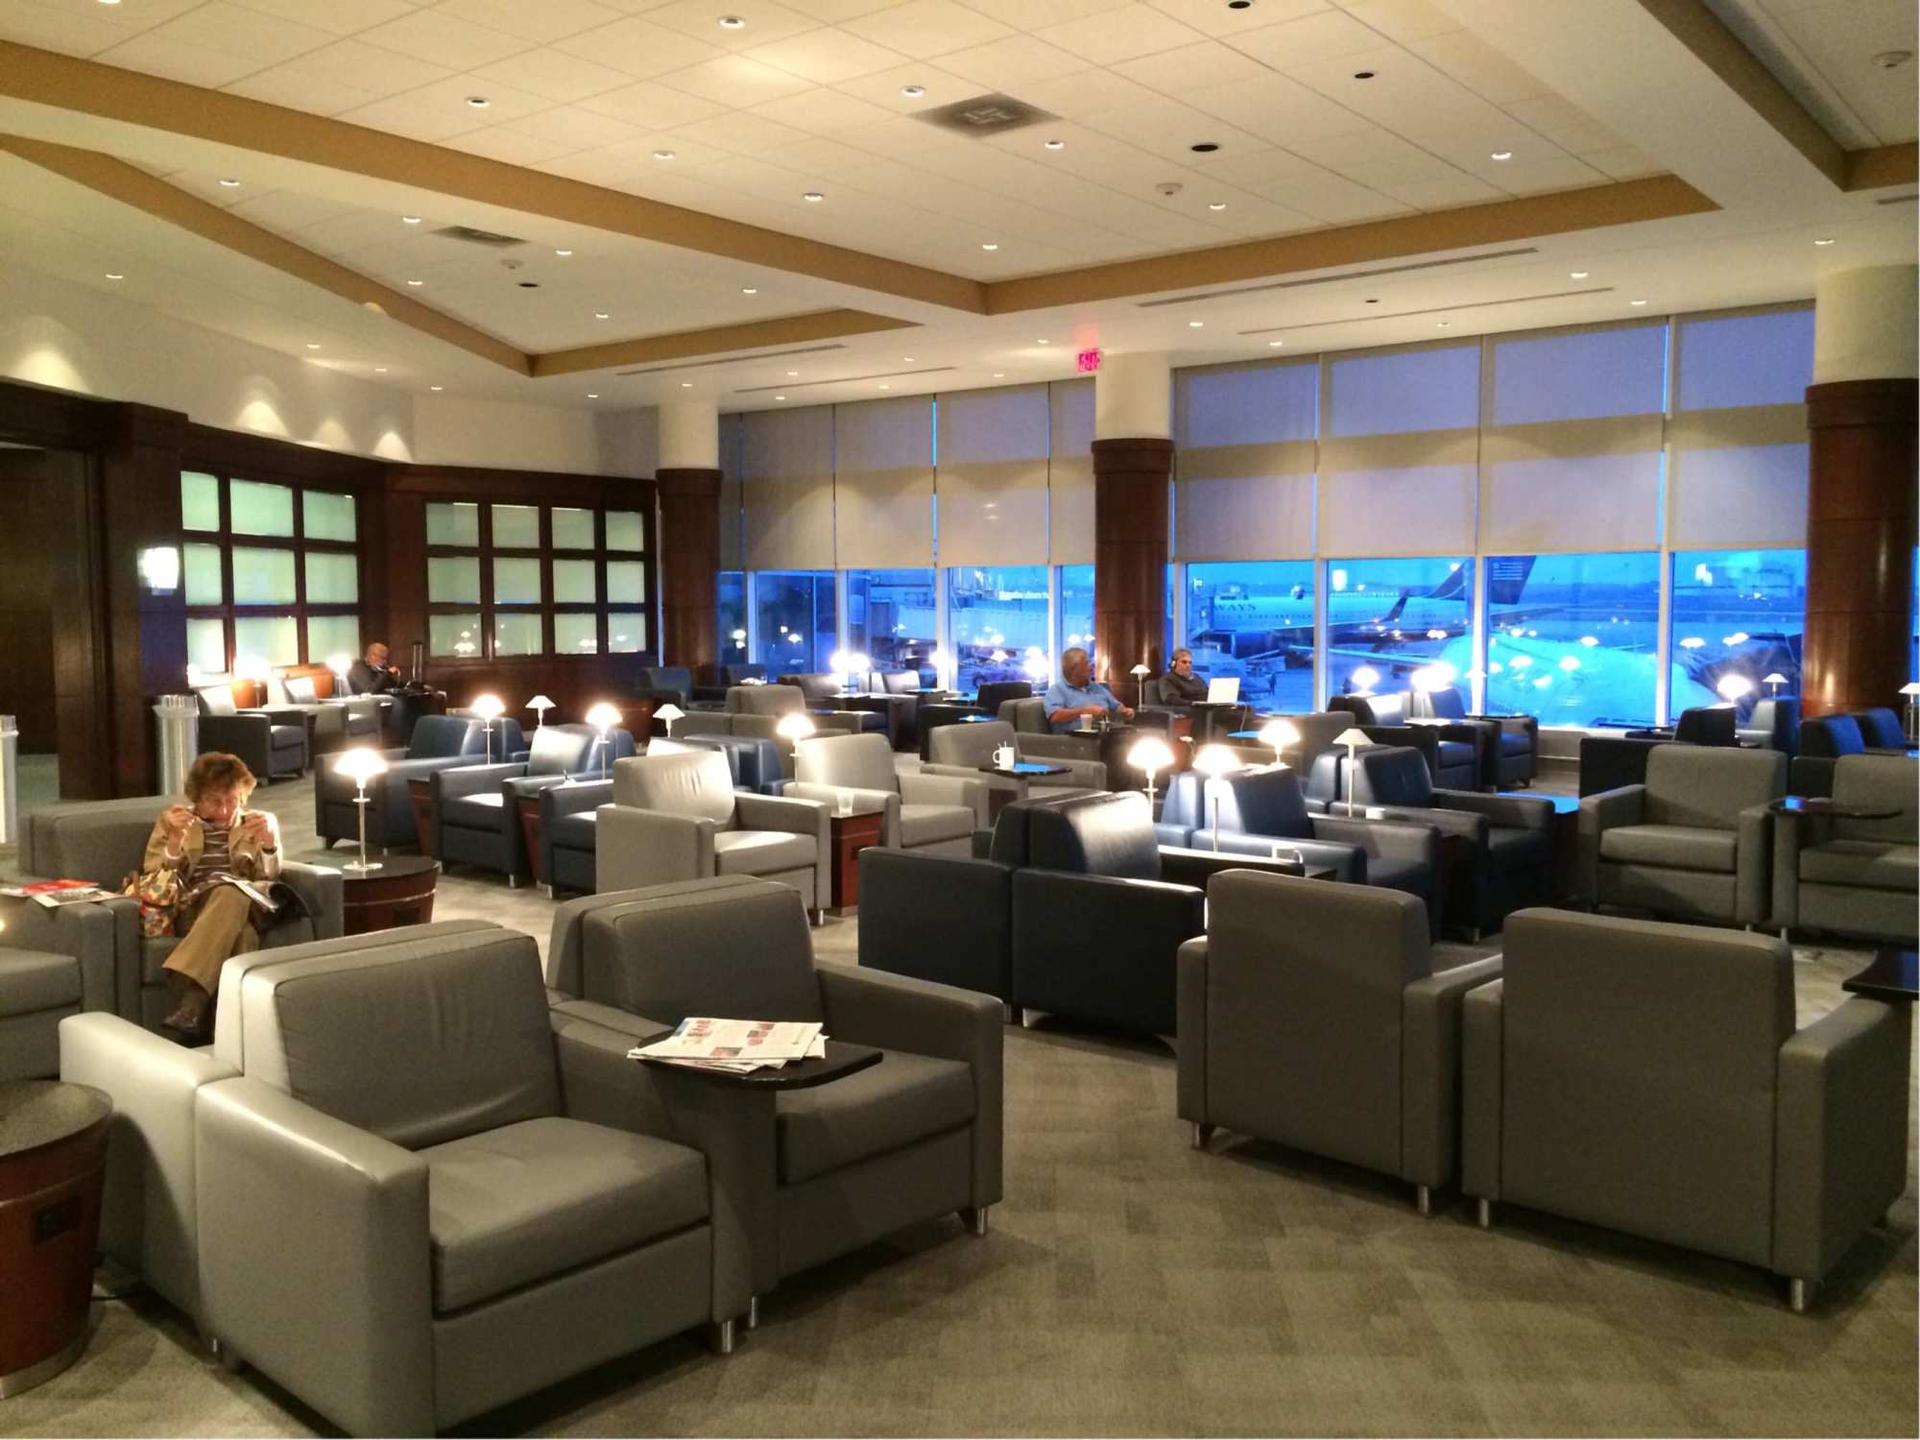 American Airlines Admirals Club image 3 of 37